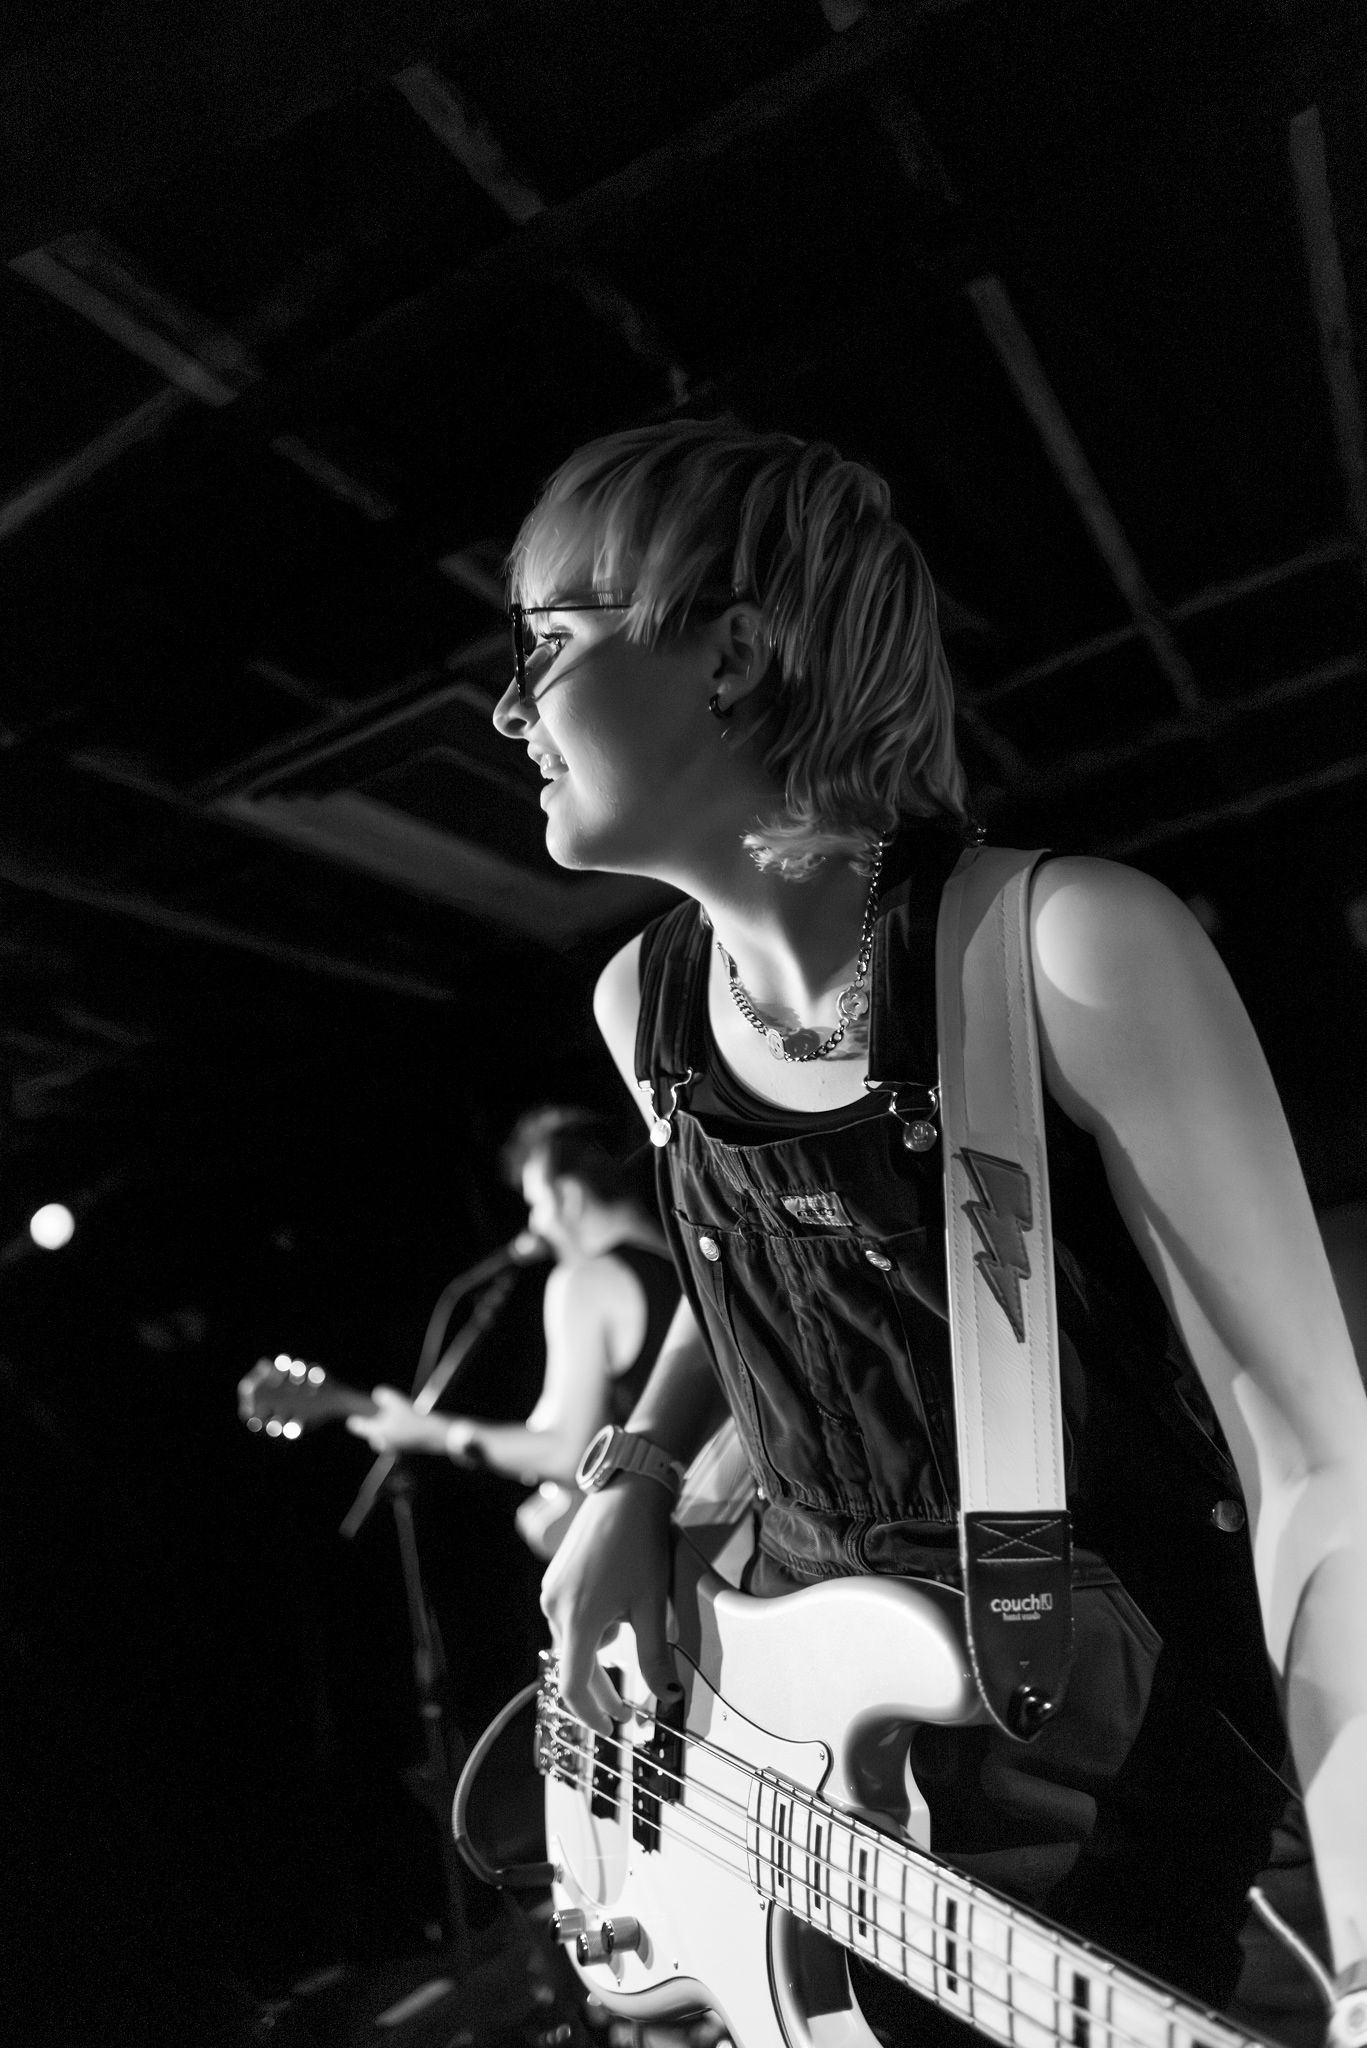 A black and white picture of a bassist playing while looking out into the crowd